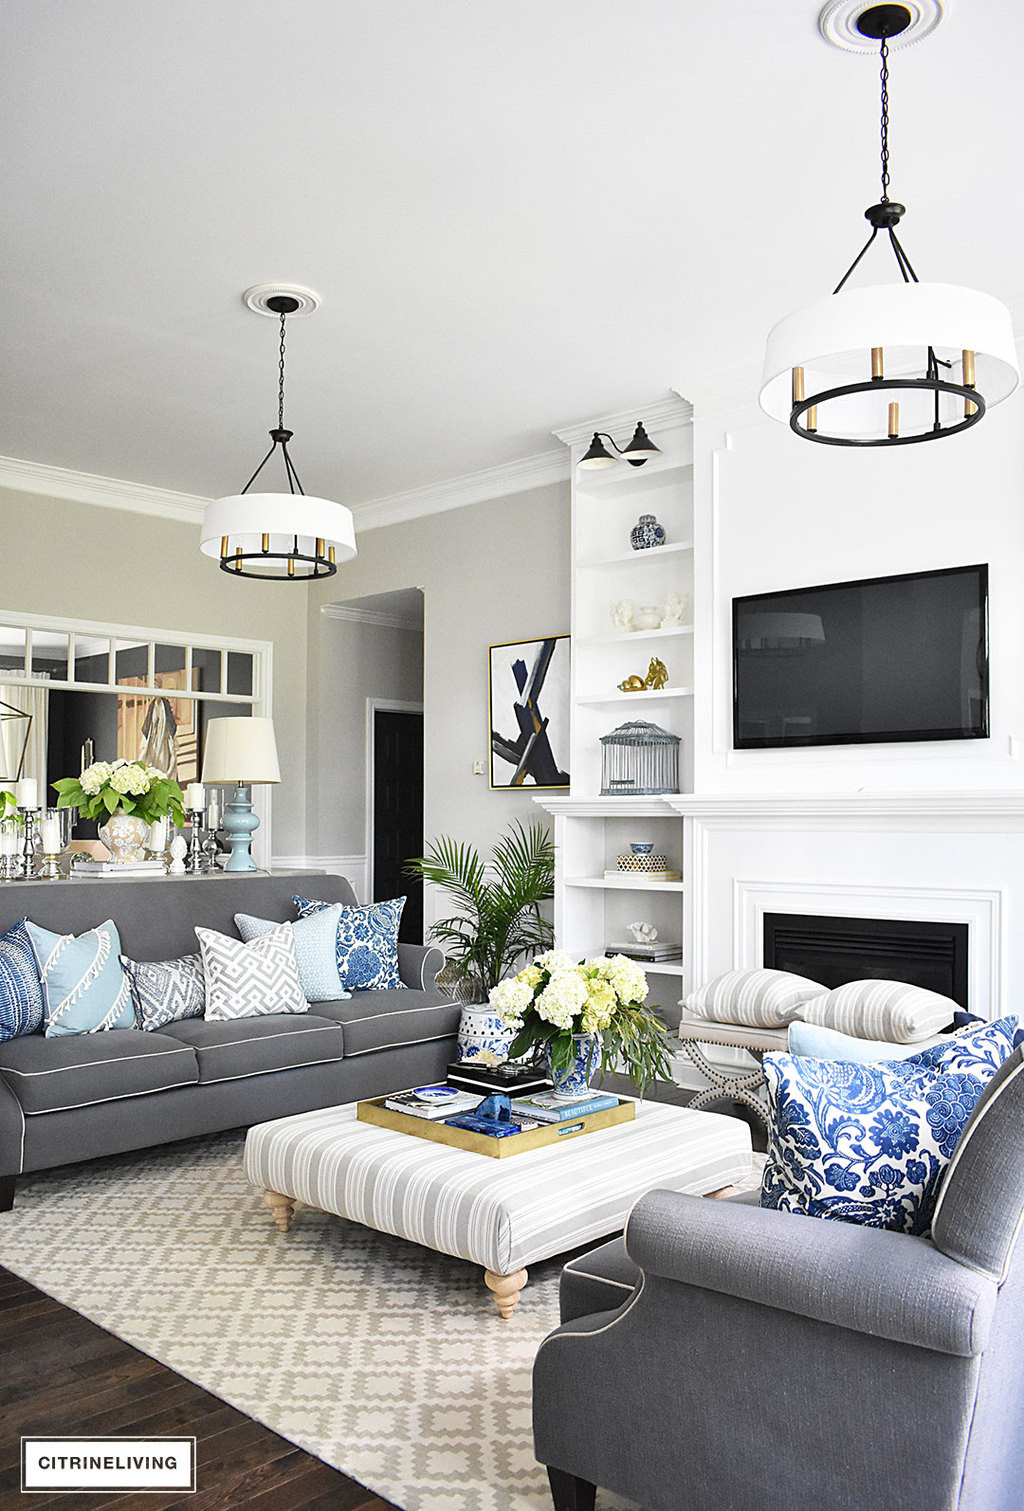 Blue Gray Living Room Ideas
 20 Fresh Ideas for Decorating with Blue and White